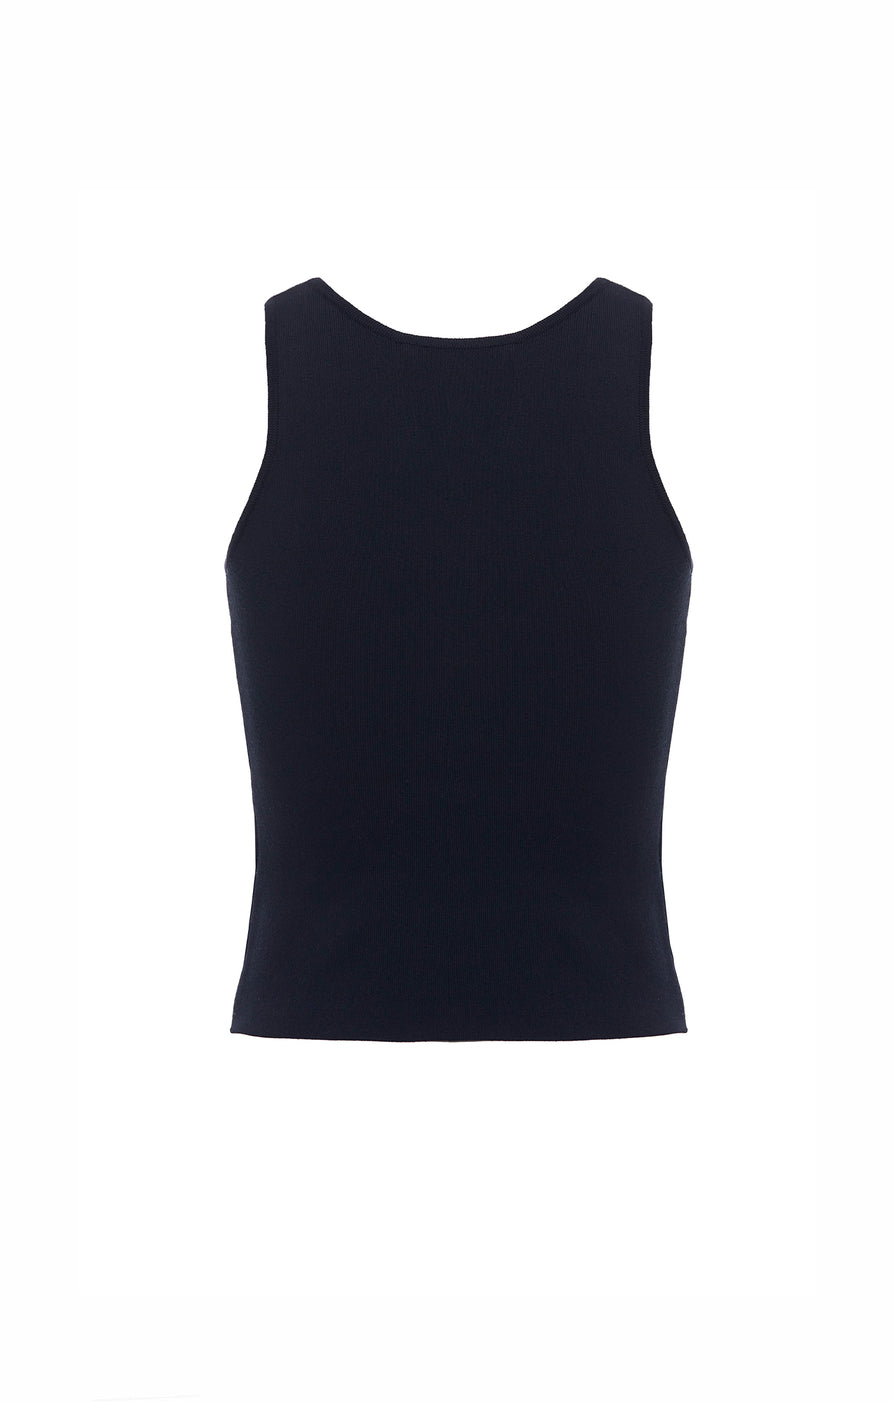 THE CLEO TOP BLACK | ghost